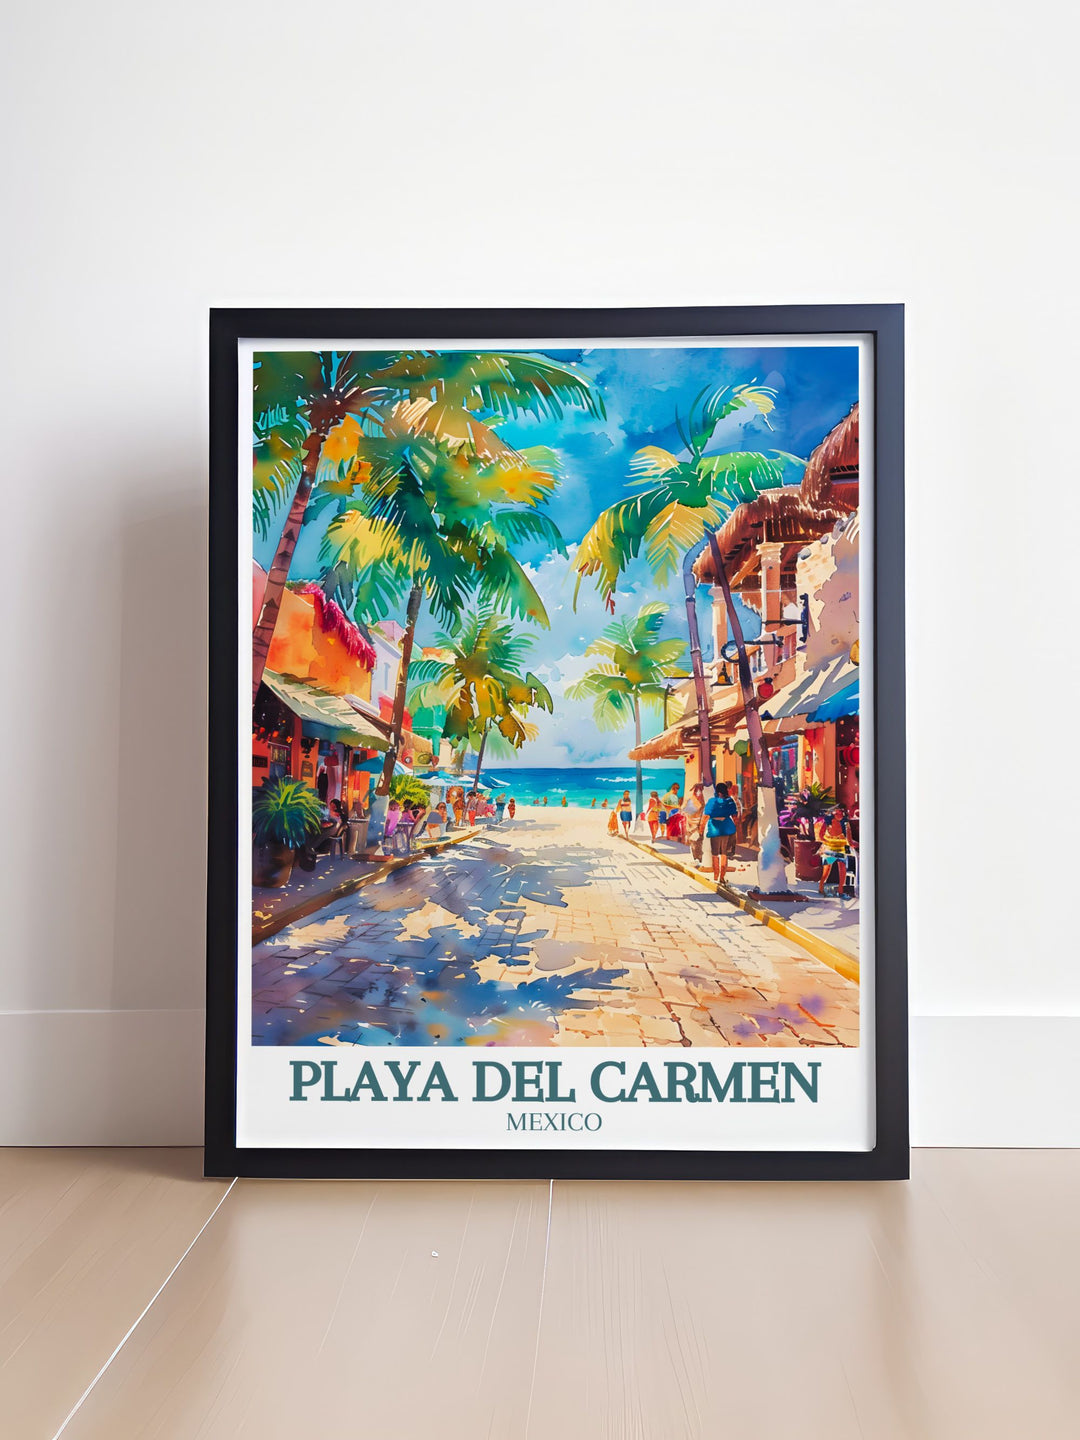 Mexico travel print depicting La Quinta Avenida and the Caribbean Sea bringing the essence of Playa Del Carmen to your home decor perfect for creating a relaxing and visually appealing space inspired by the Caribbean